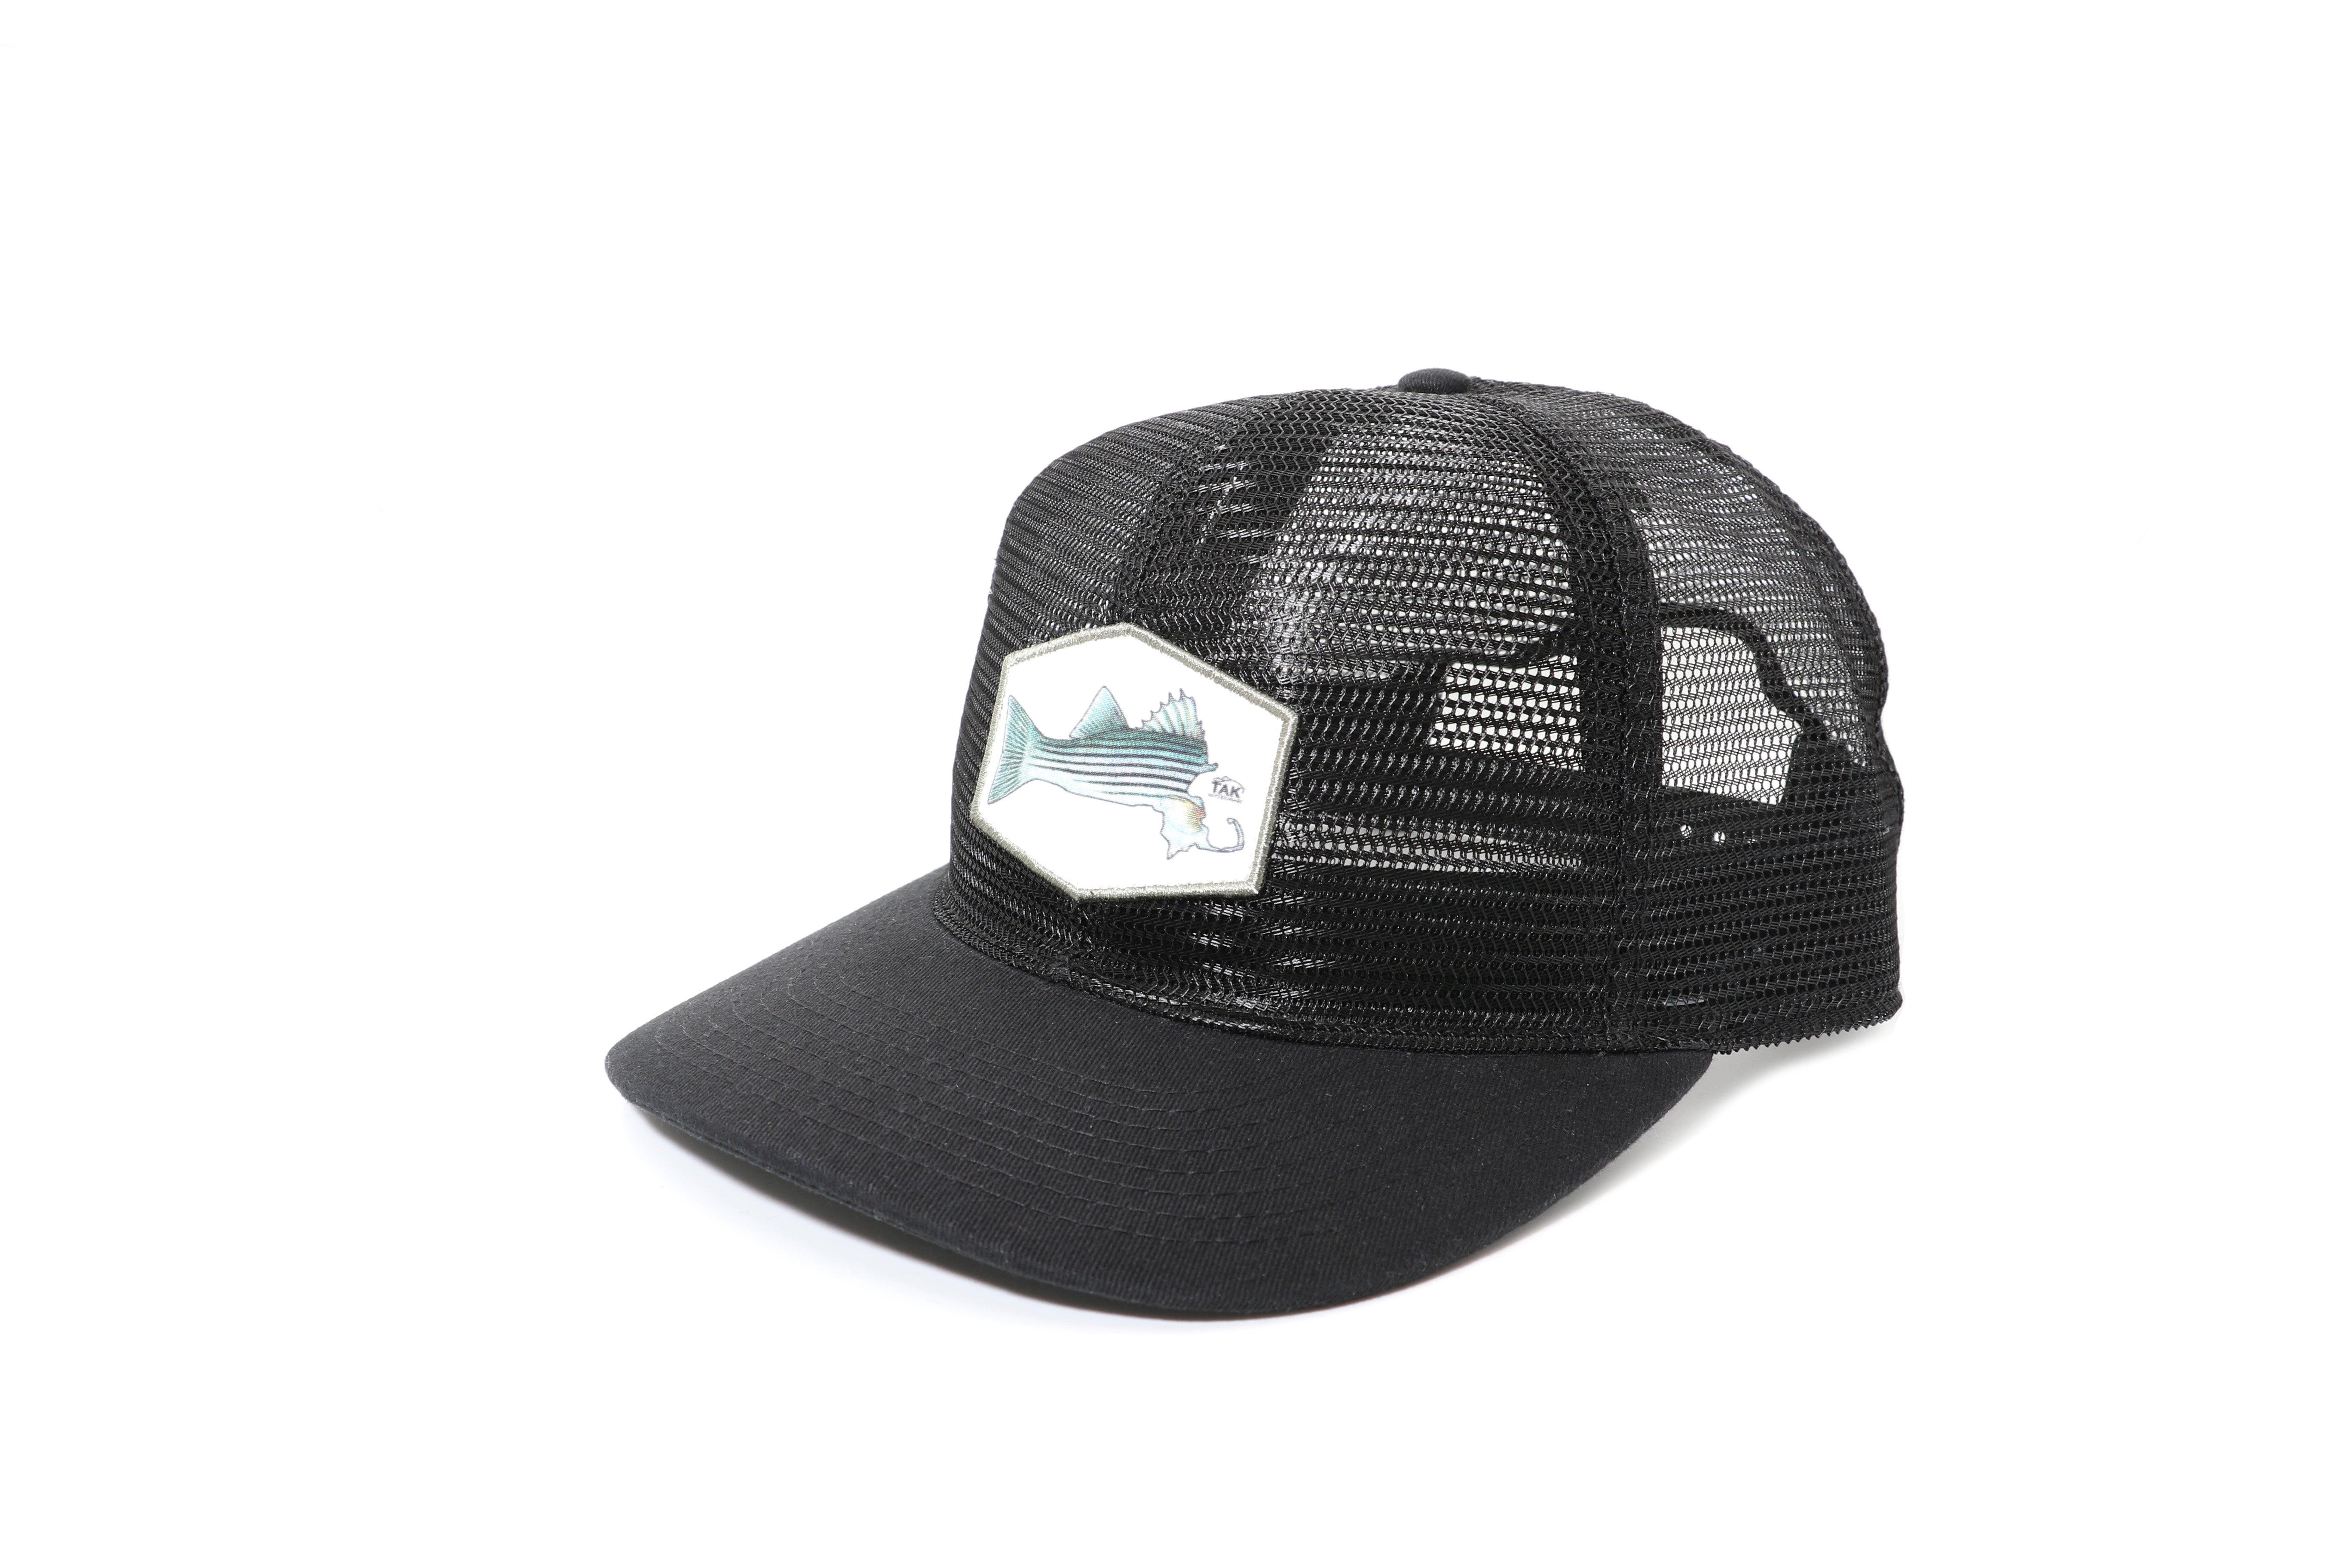 Scisuittech Buy Bass Fish Hats for Men and Women Black at Ubuy India